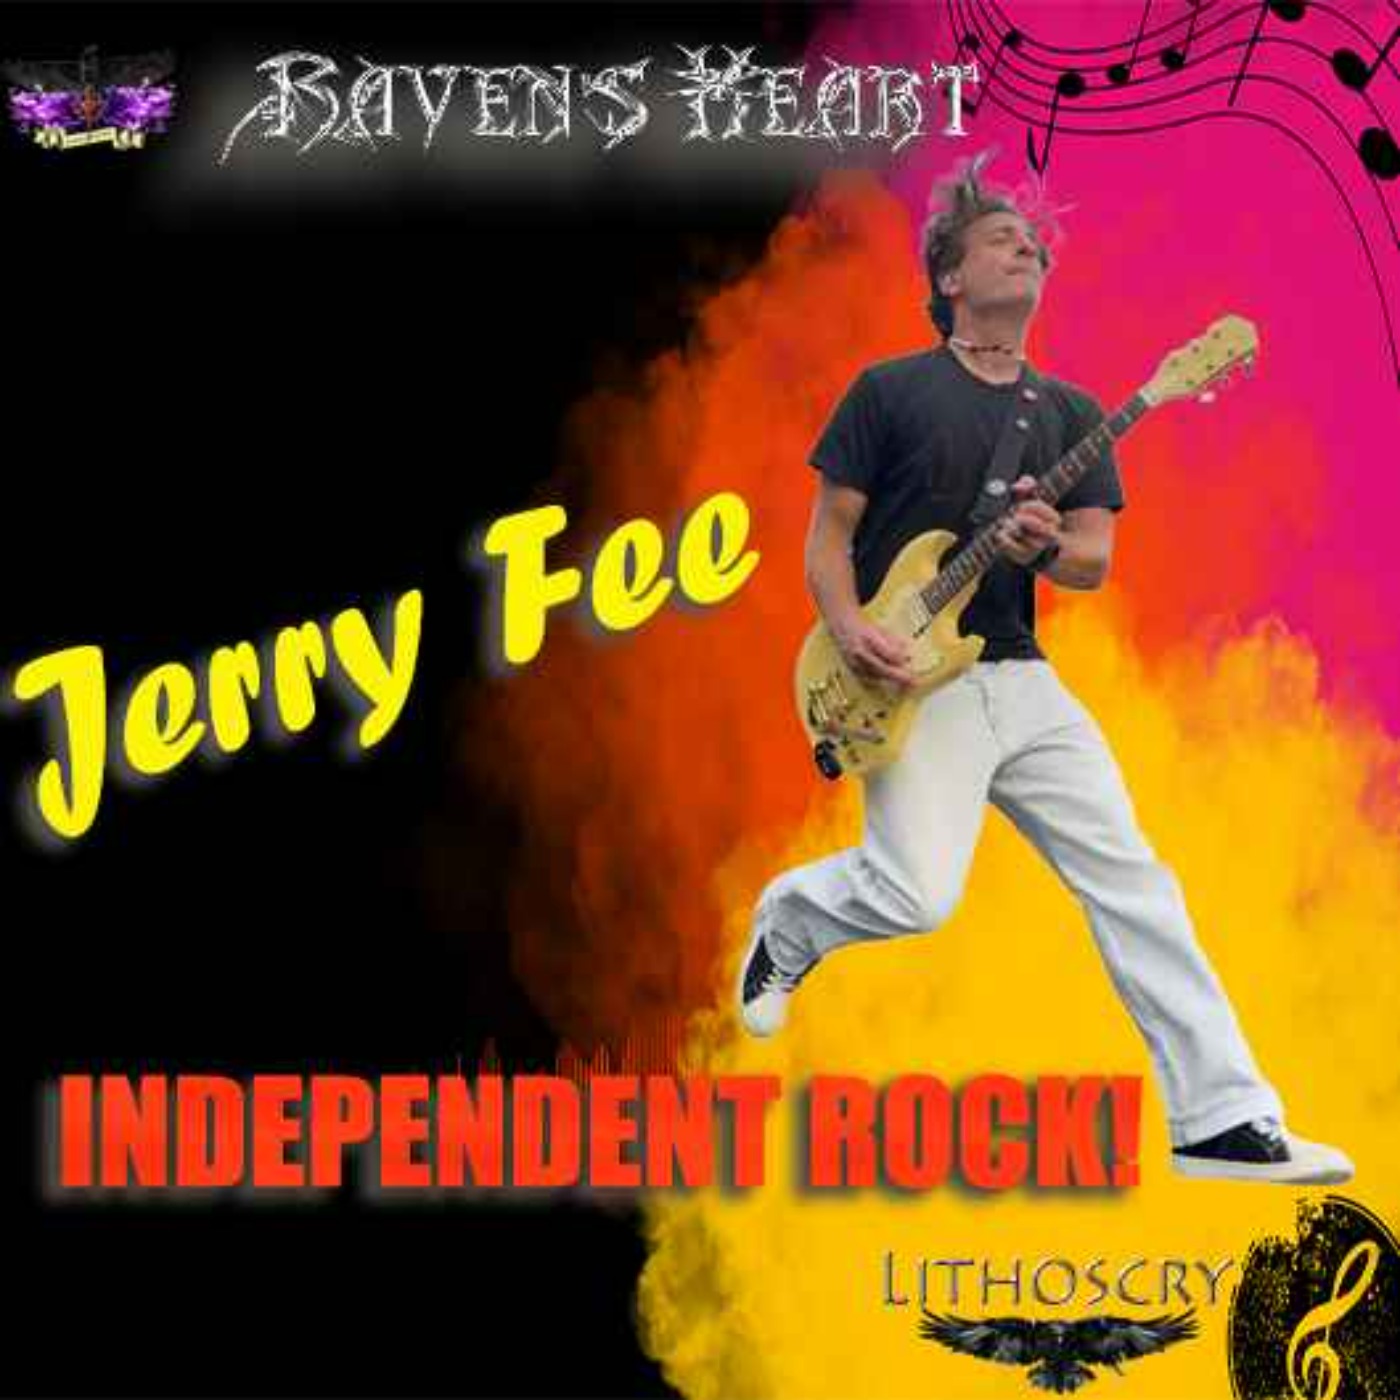 New Indie Rock Music From Jerry Fee (Heliograph)